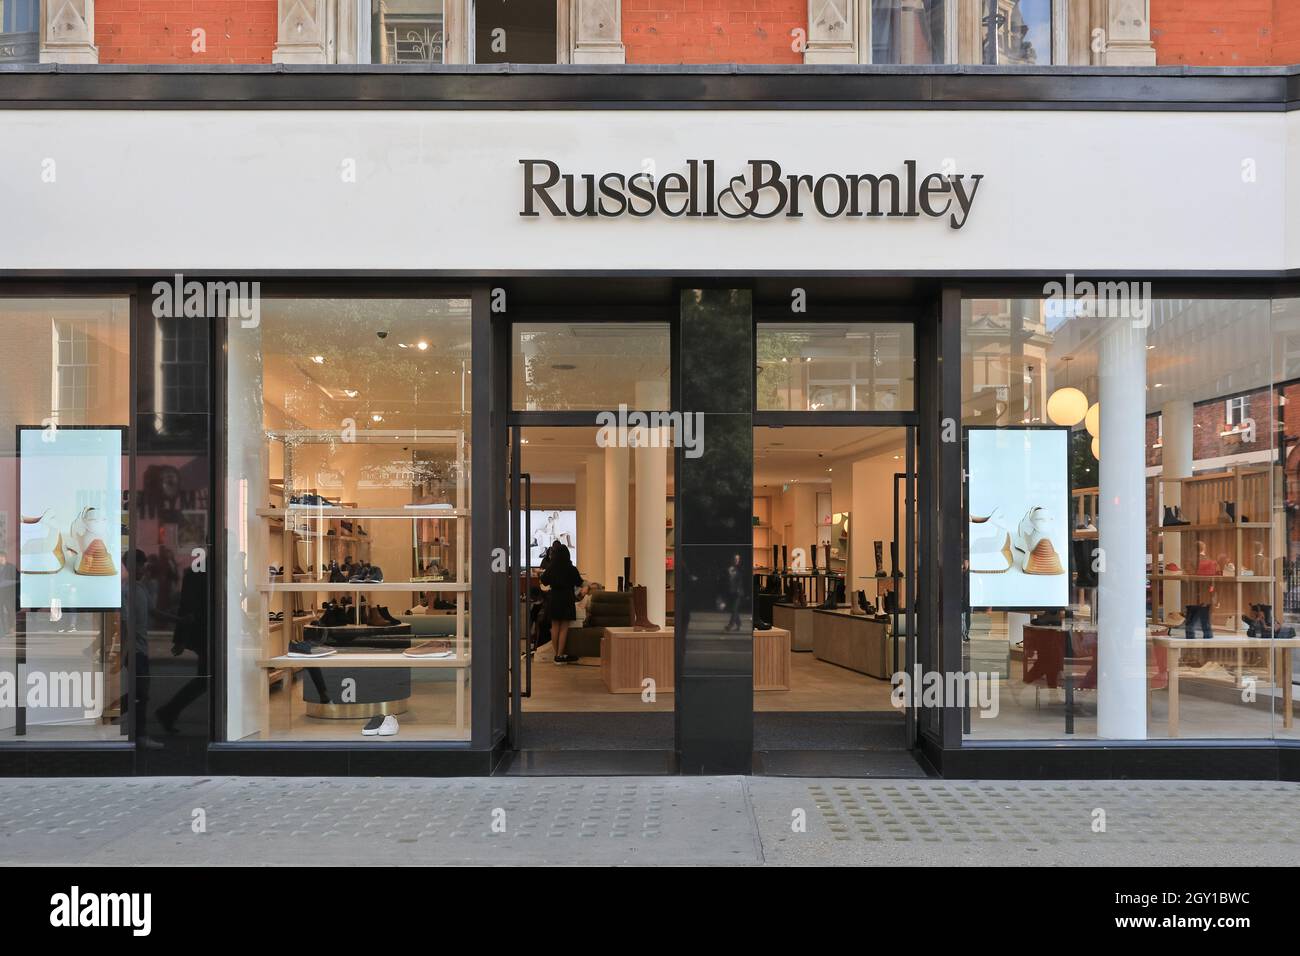 Russel & Bromley British shoe shop exterior, shoppers outside footwear ...